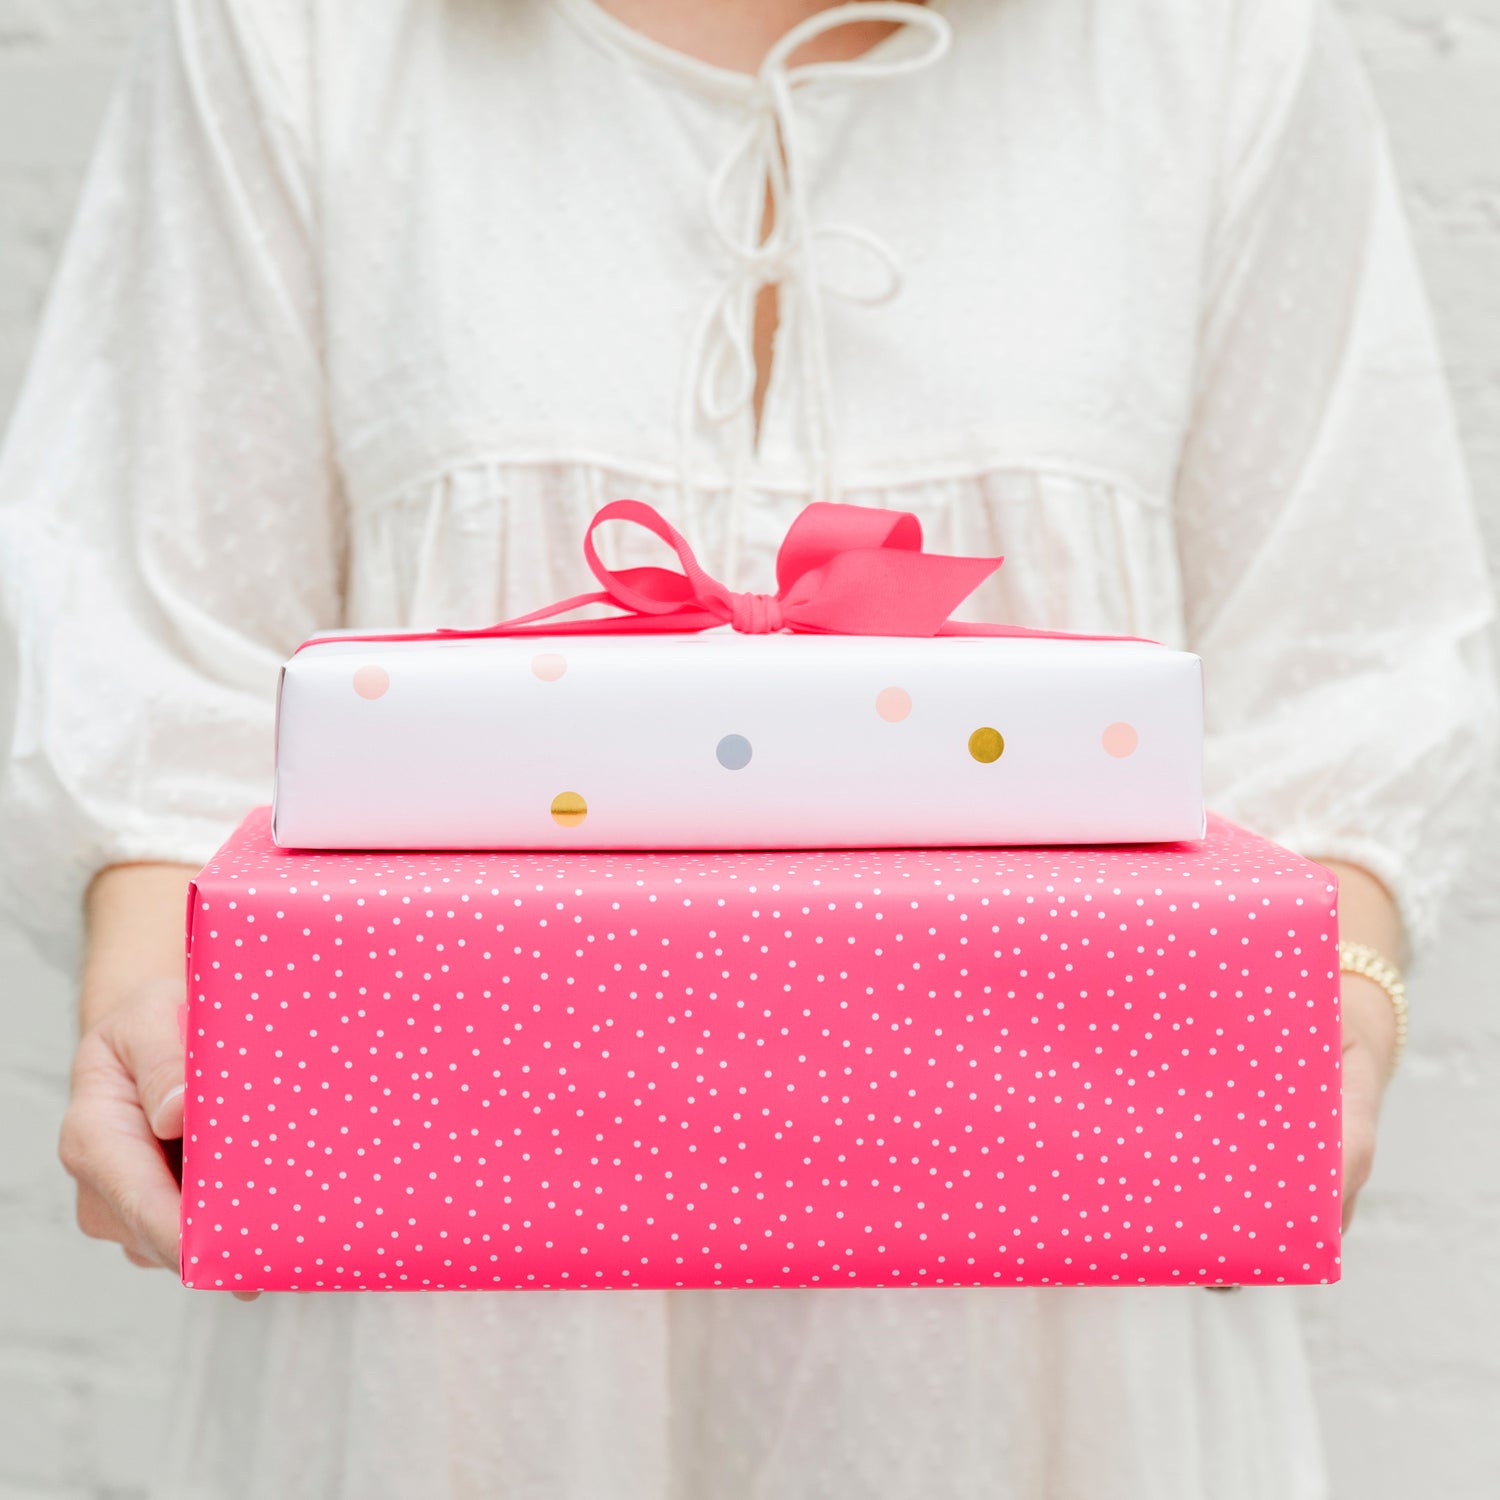 Stack of sugar paper and target wrapped gifts in neon pink and a bright colored polka dot